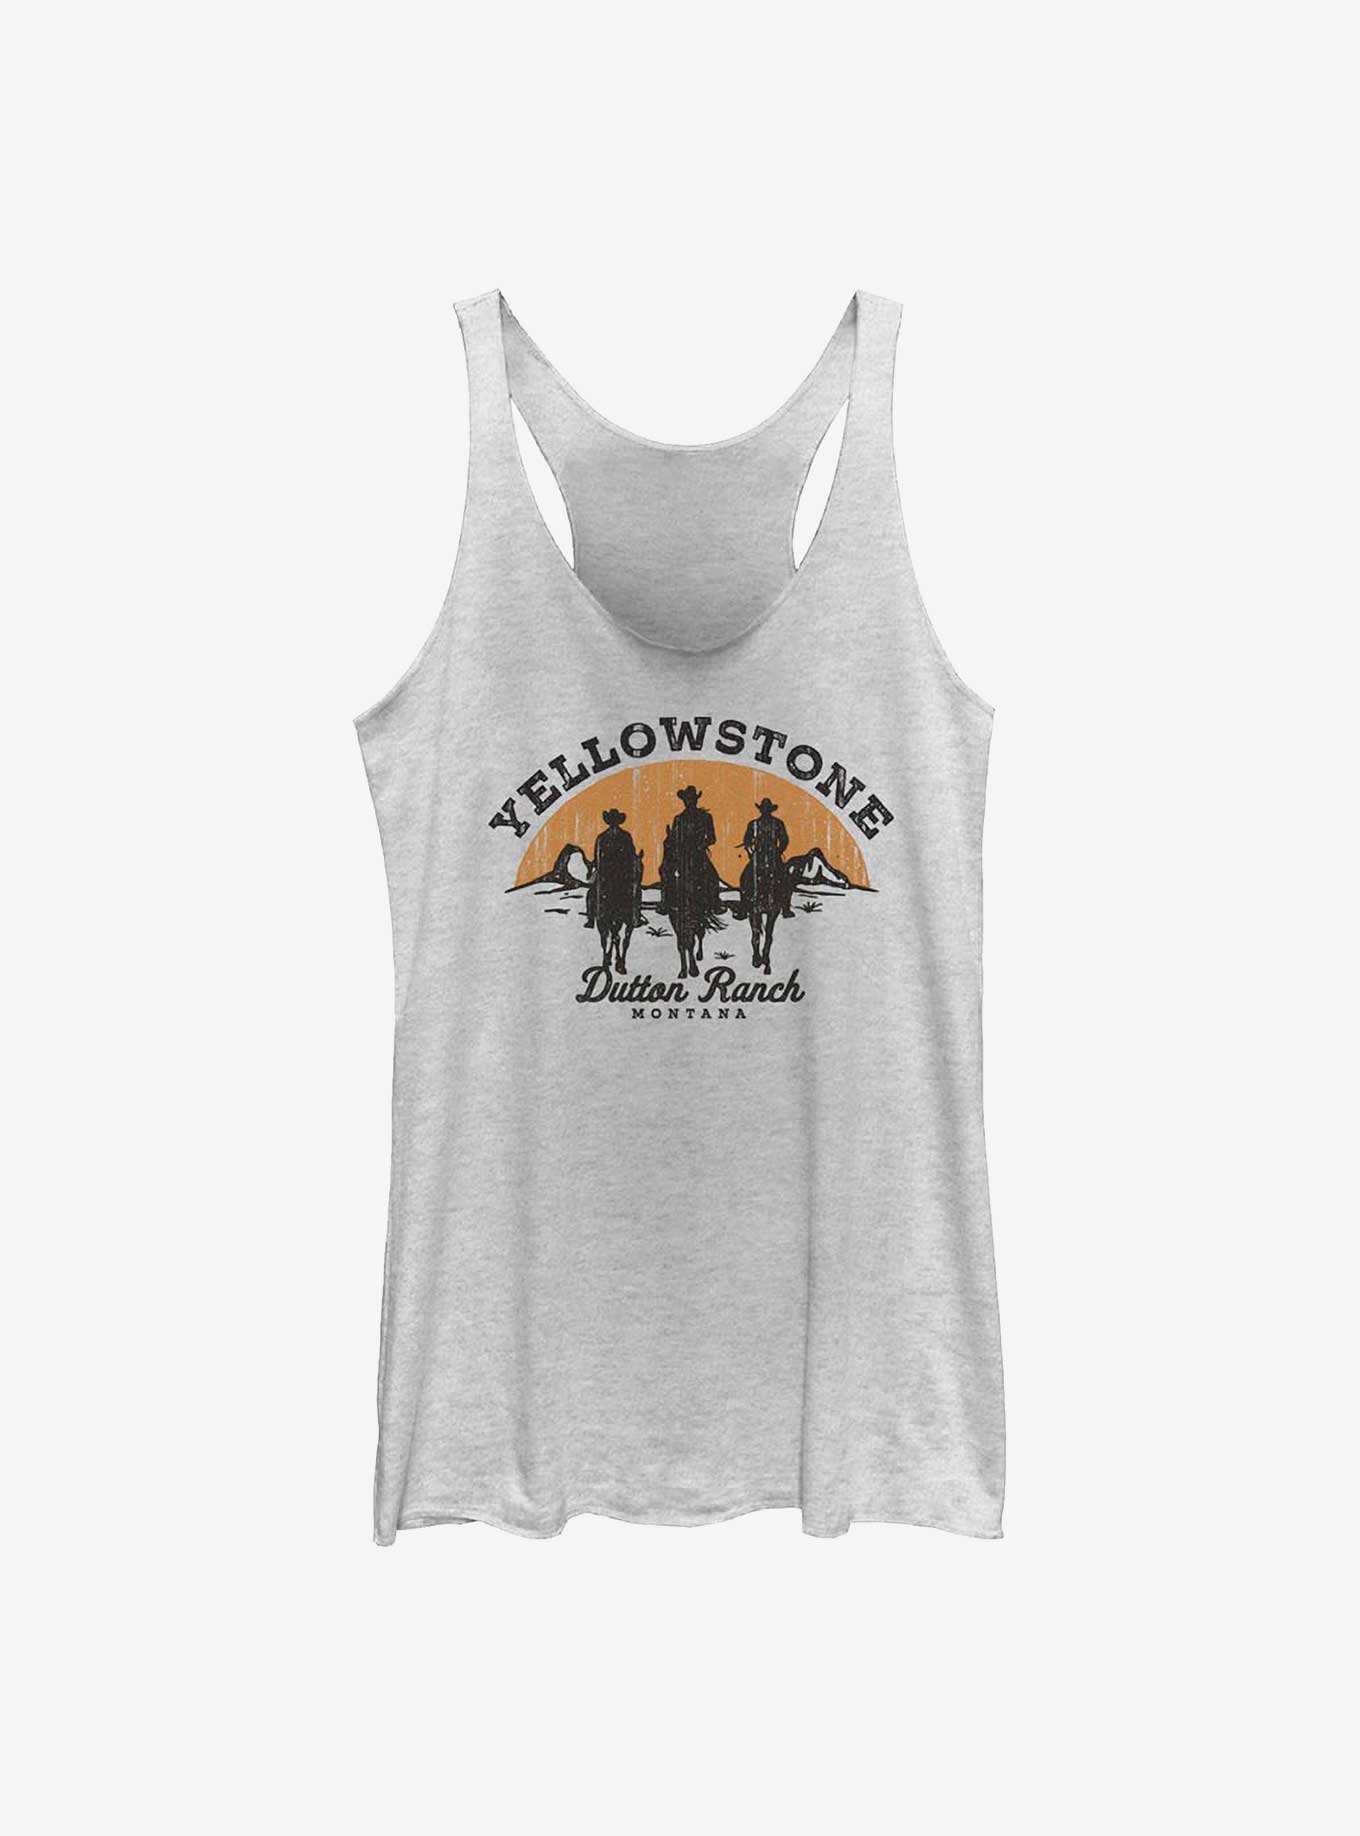 Yellowstone Riding Into The Sunset Girls Tank, , hi-res